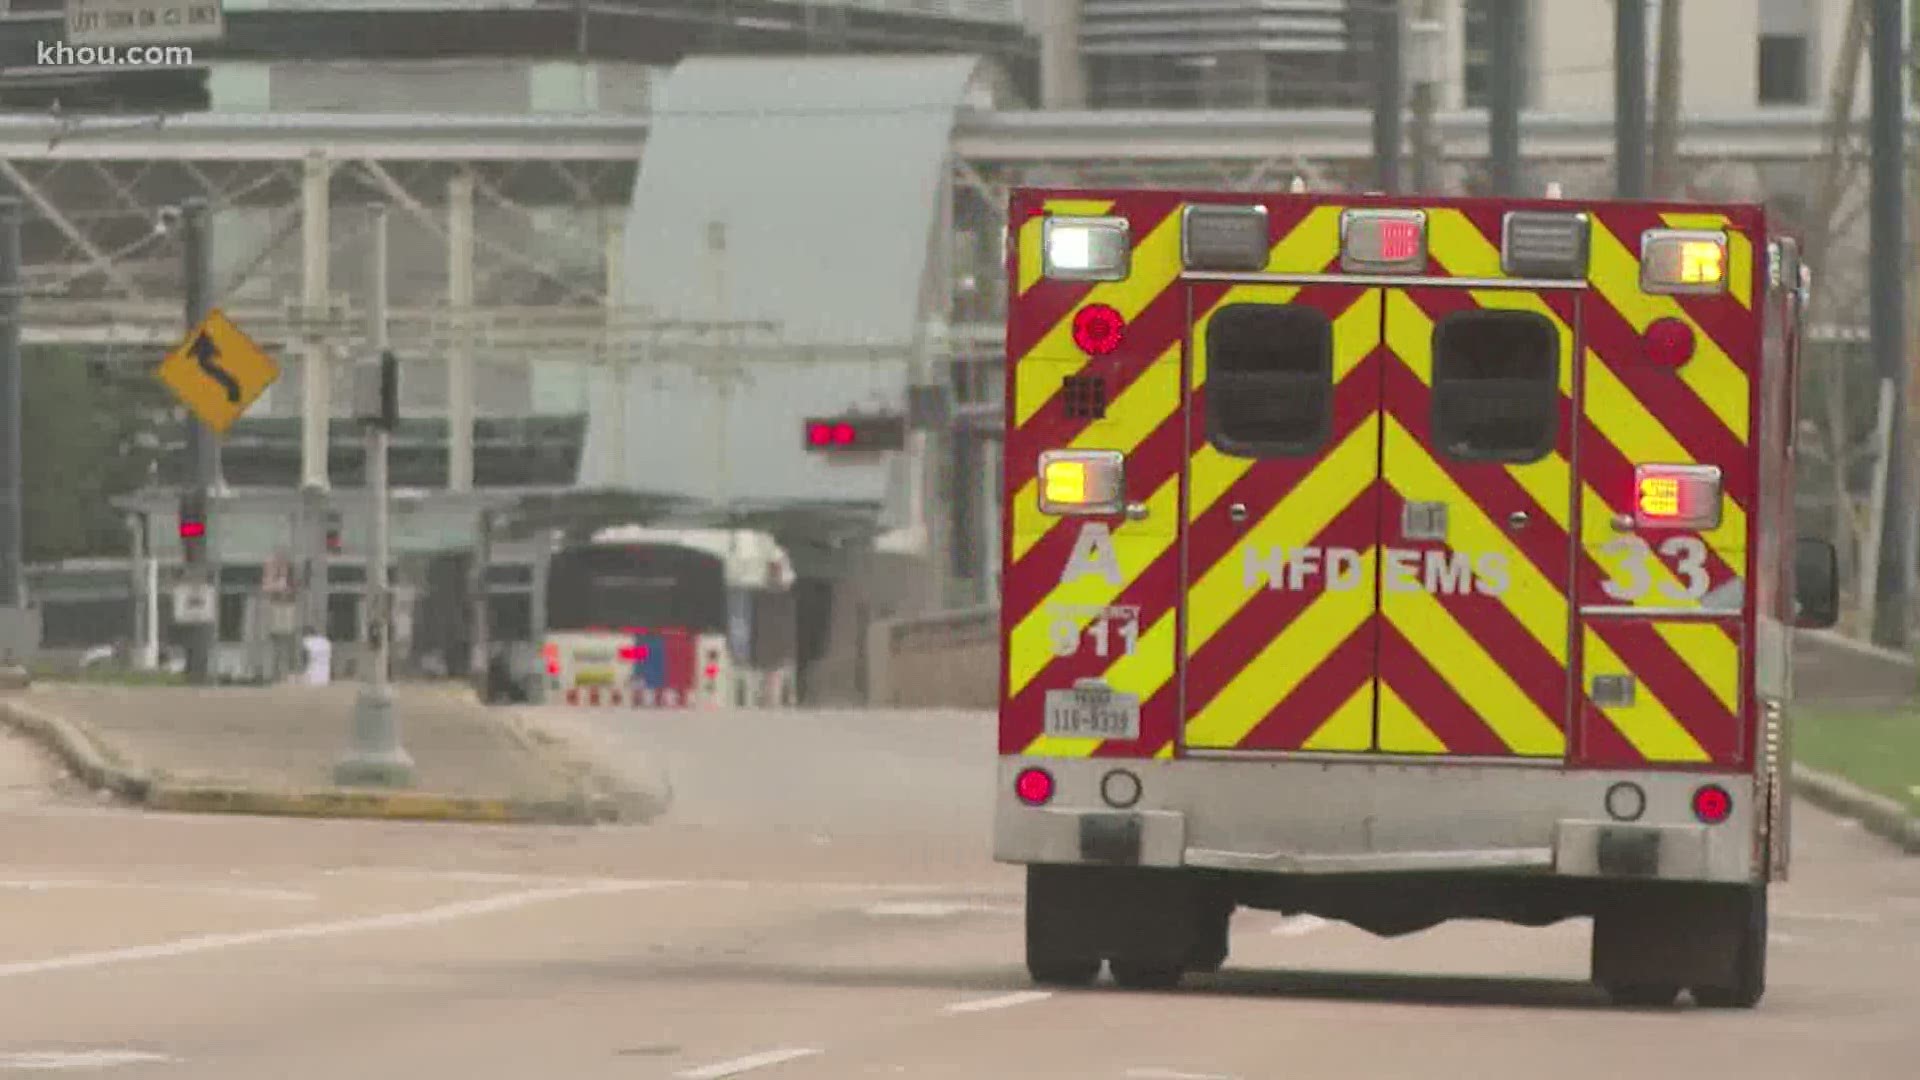 Paramedics are running into often hour-long wait times when transferring patients from an ambulance to a hospital, Houston Fire Chief Sam Peña said Thursday.